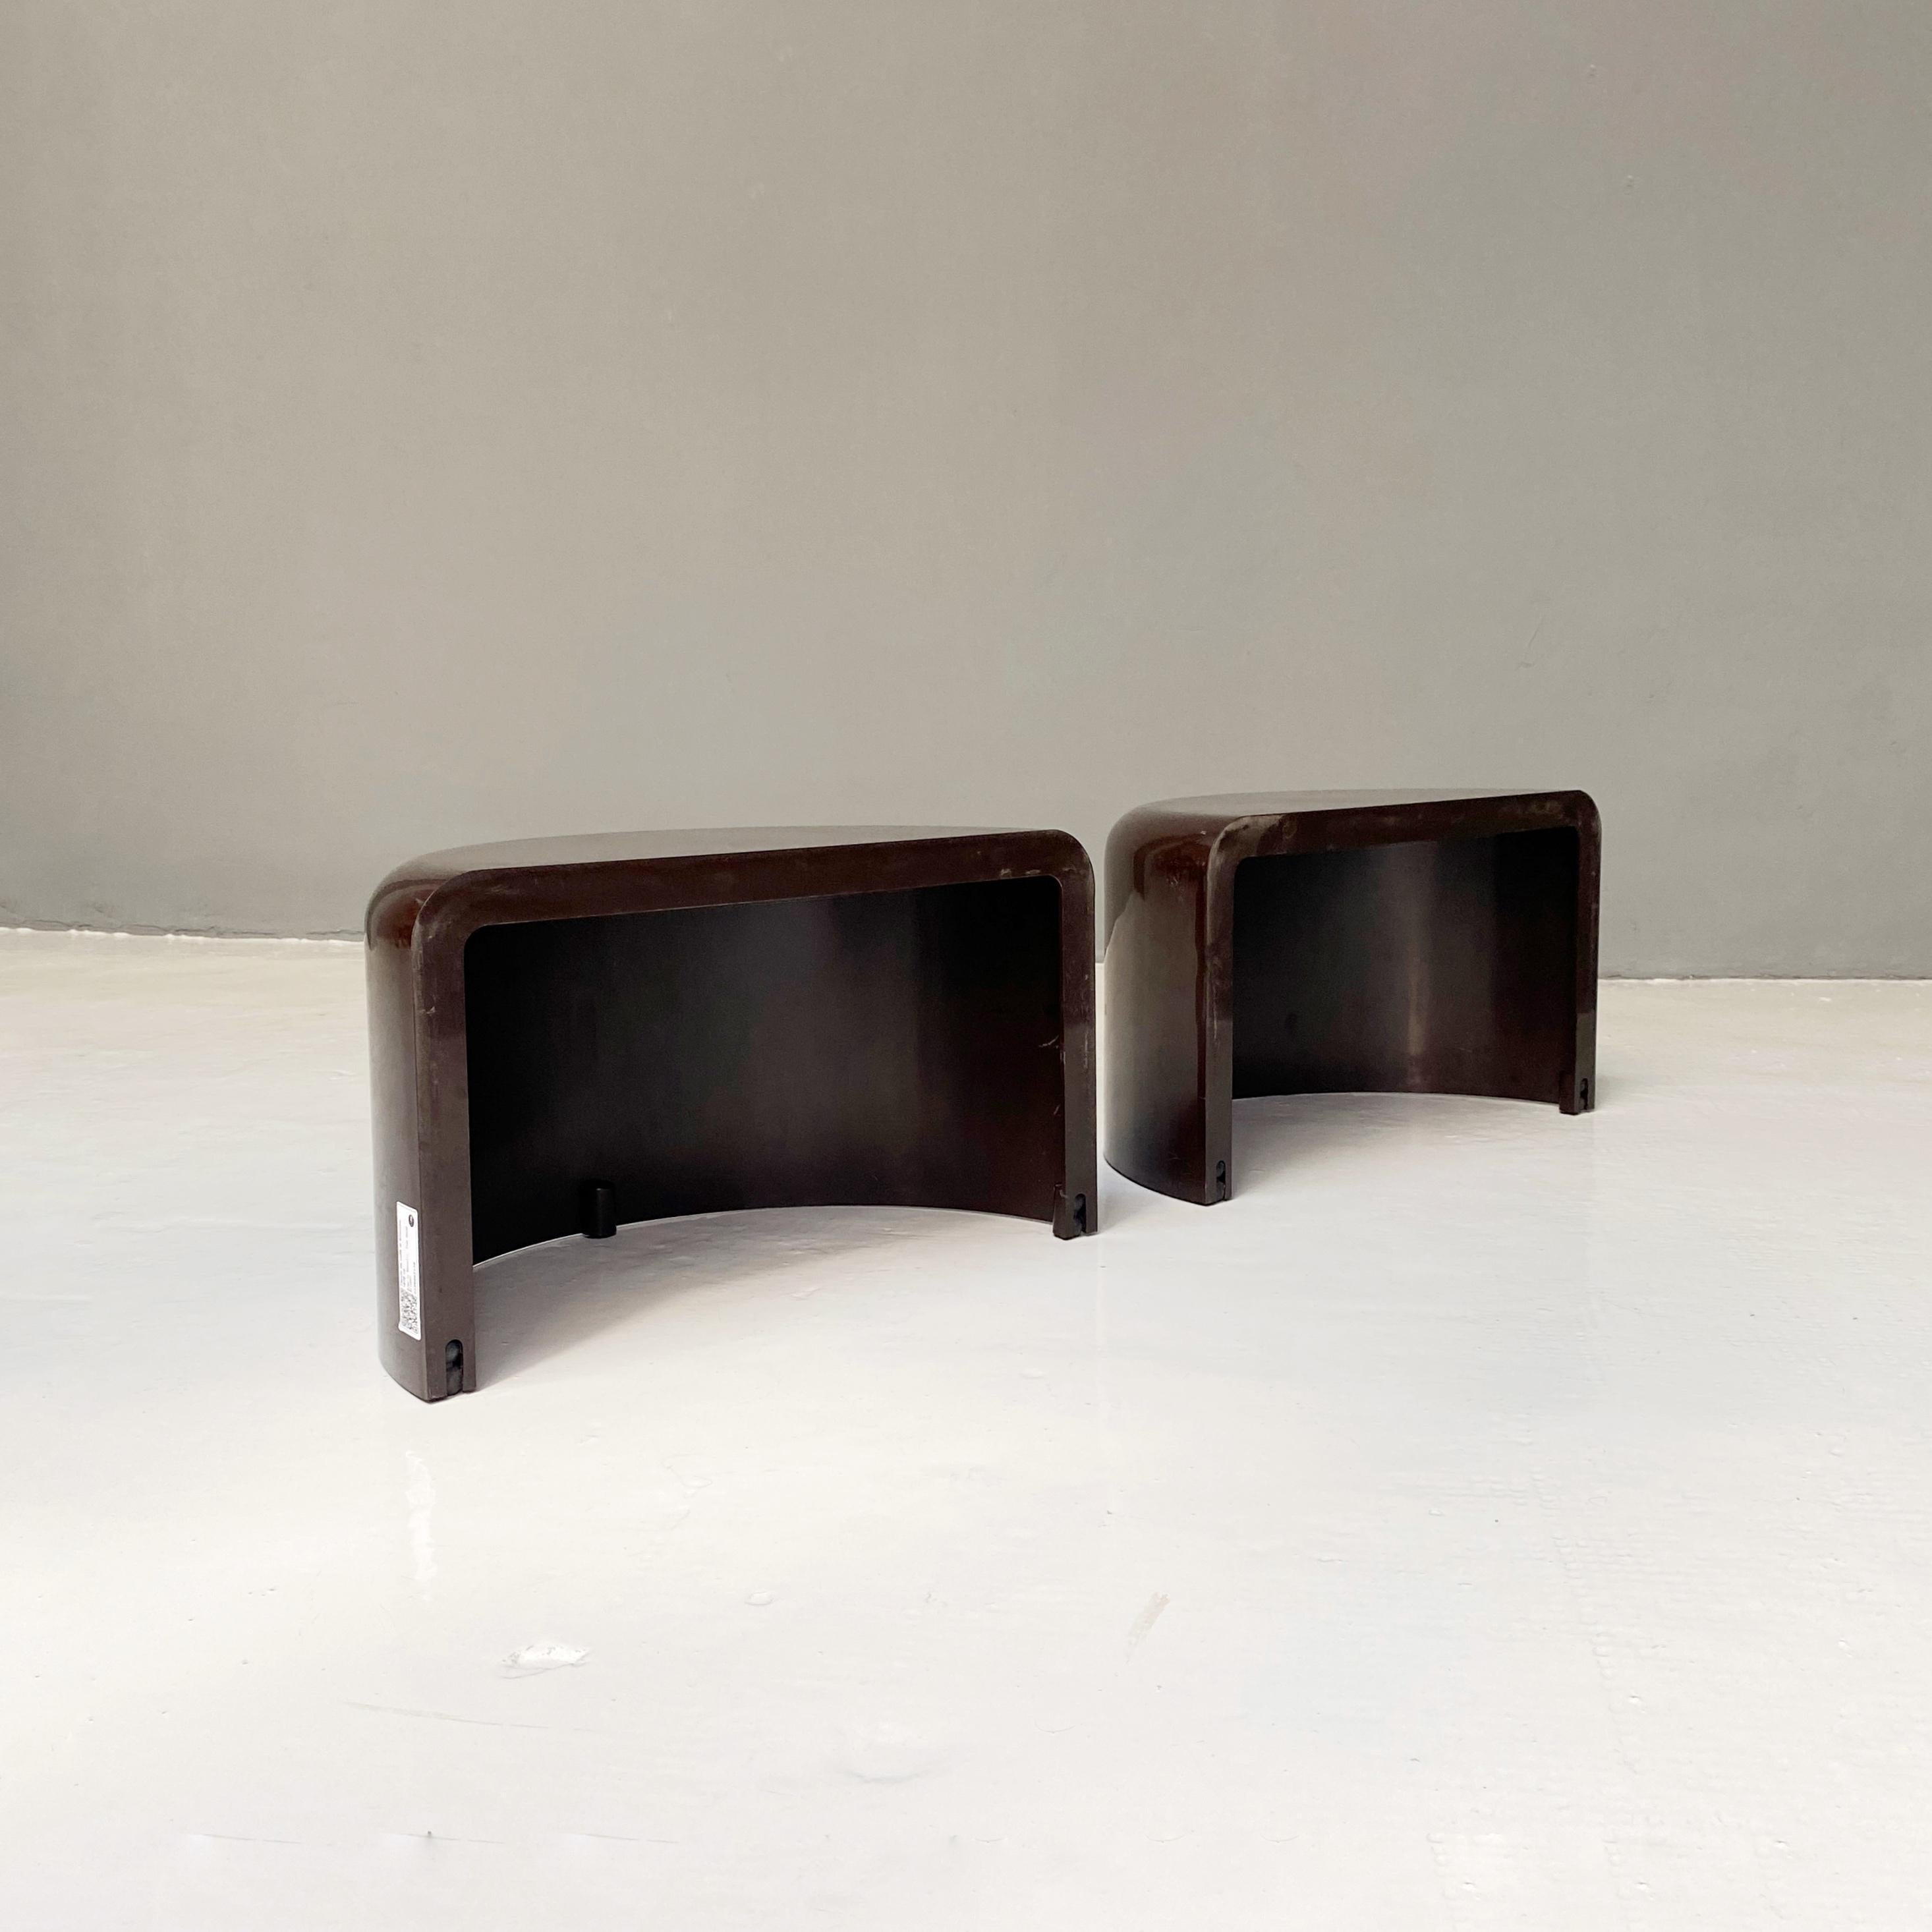 Modern Brown Plastic Table by Alberto Rosselli and Isao Hosoe for Bilumen, 1980s For Sale 9